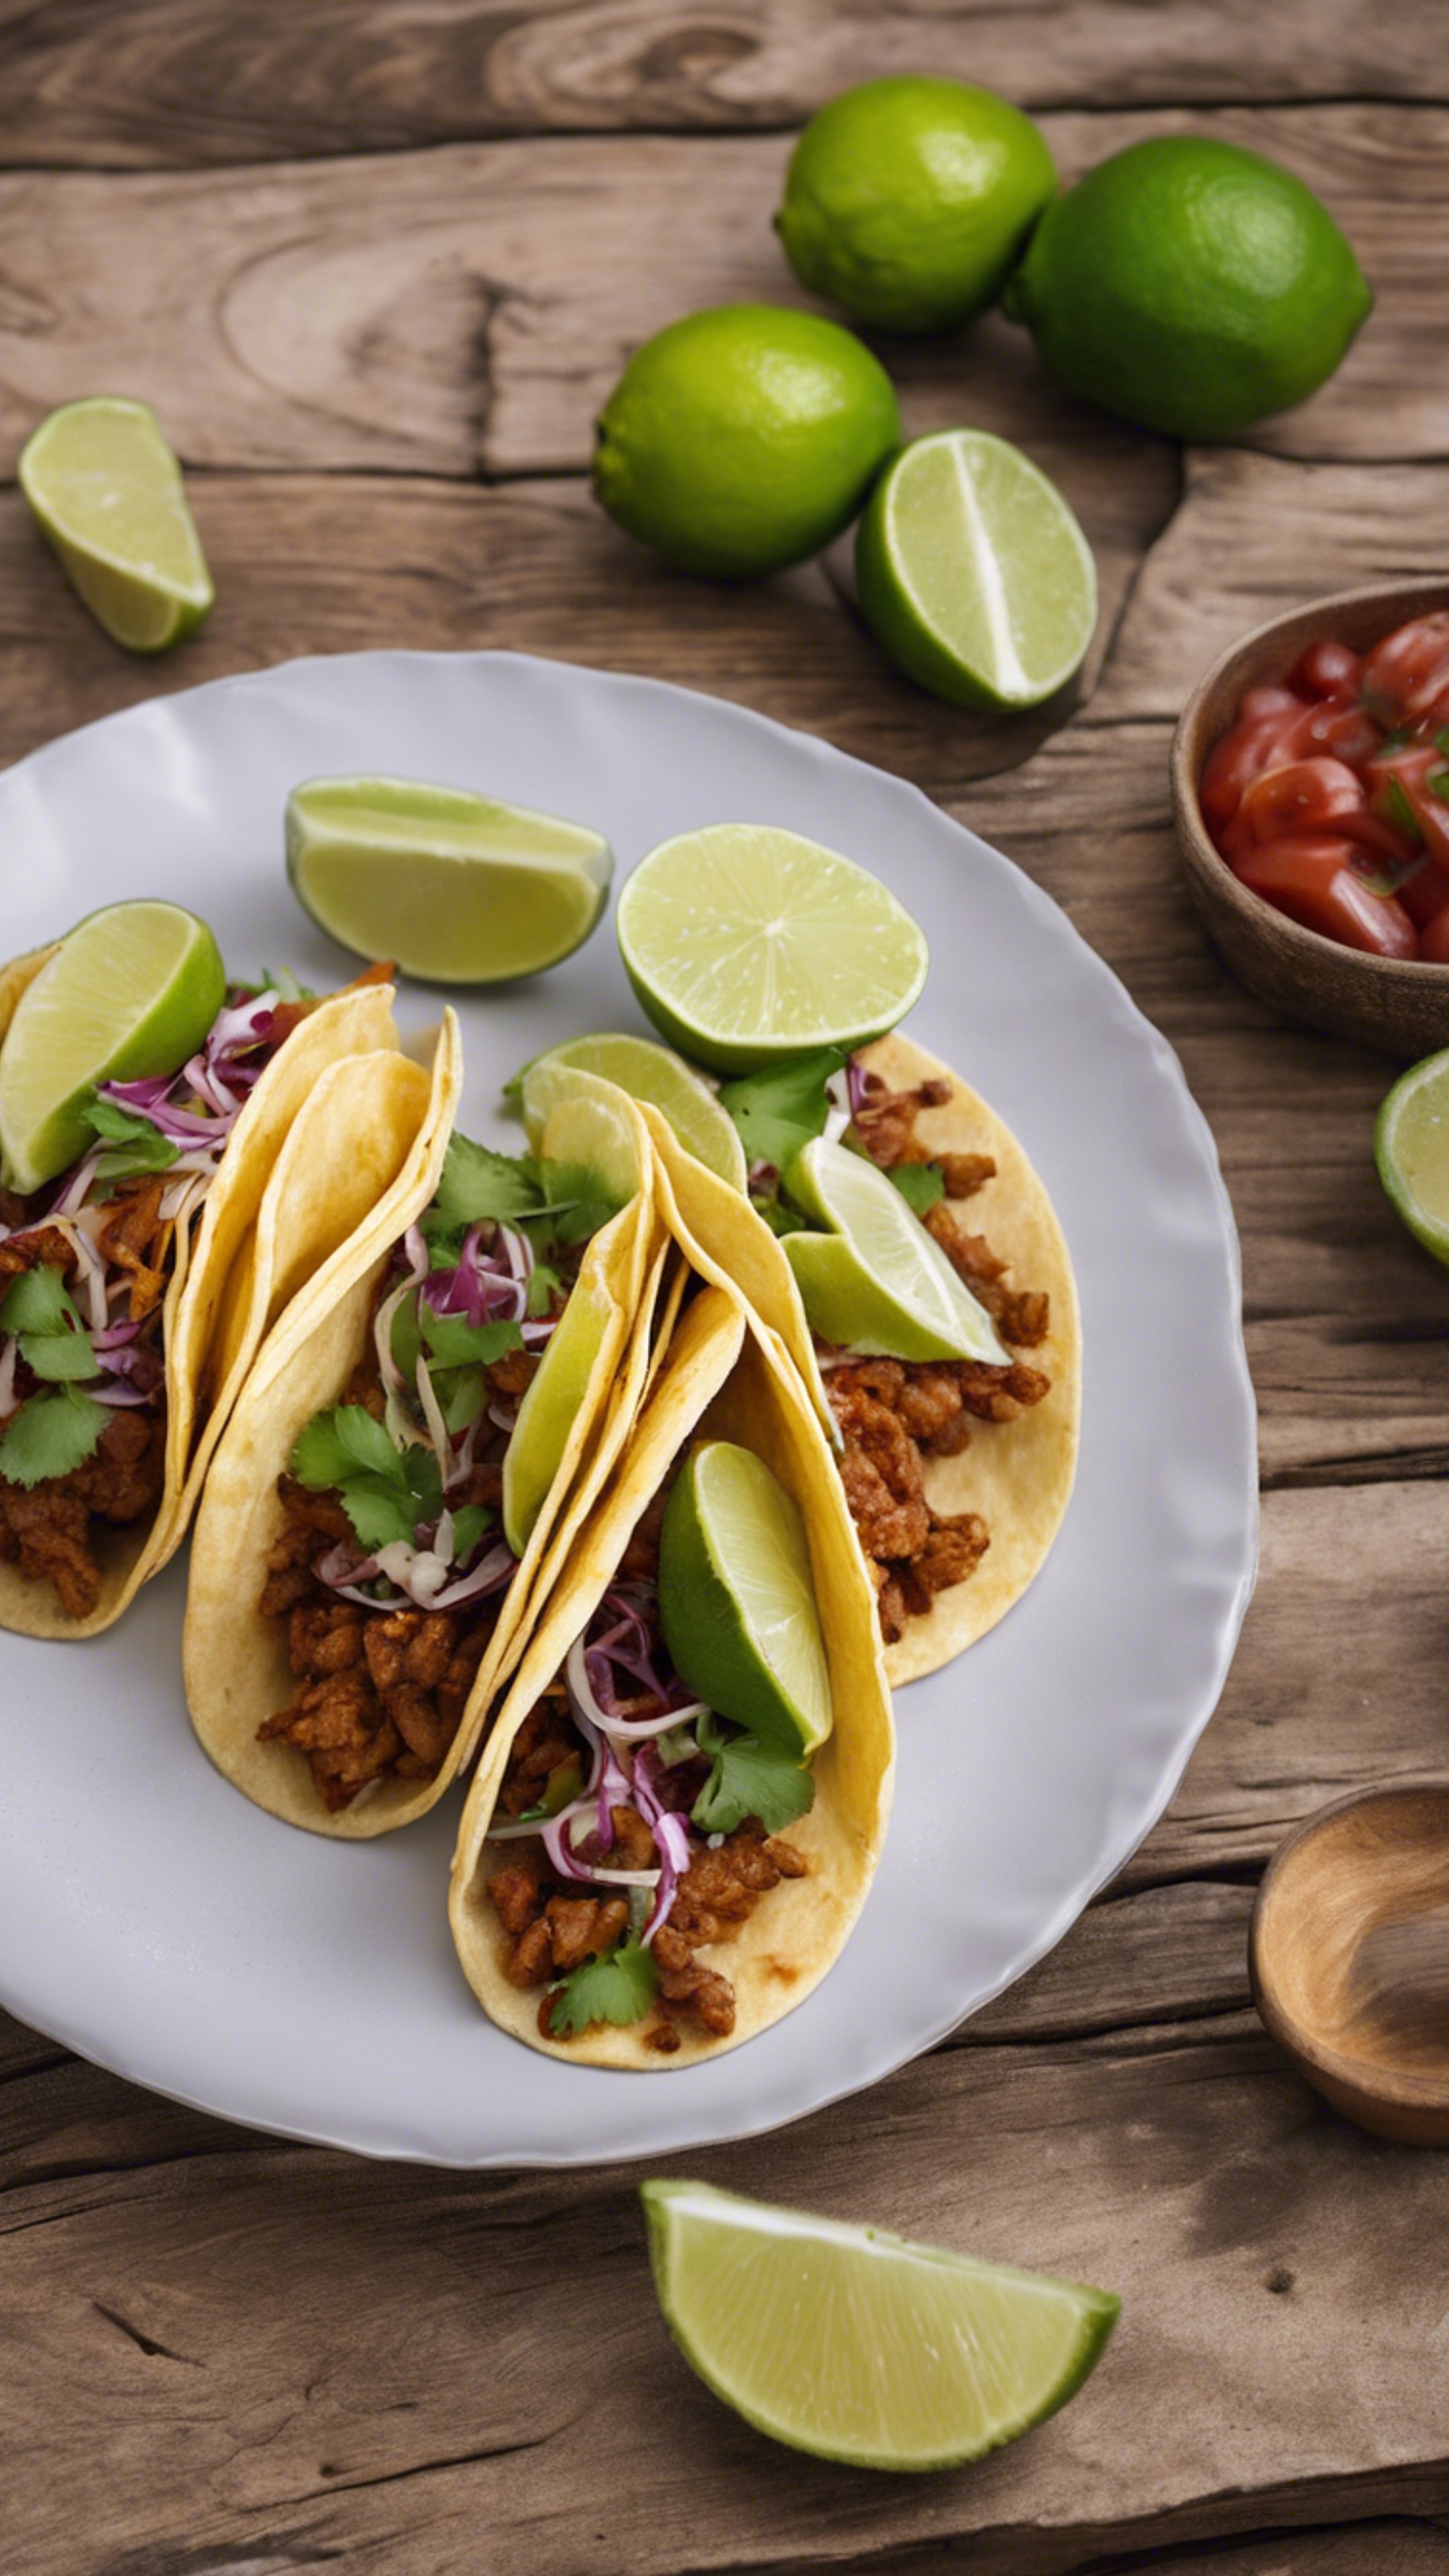 A plate of tacos garnished with fresh lime wedges on a rustic wooden table. Kertas dinding[5f6c6b777f9c4d0caf3c]